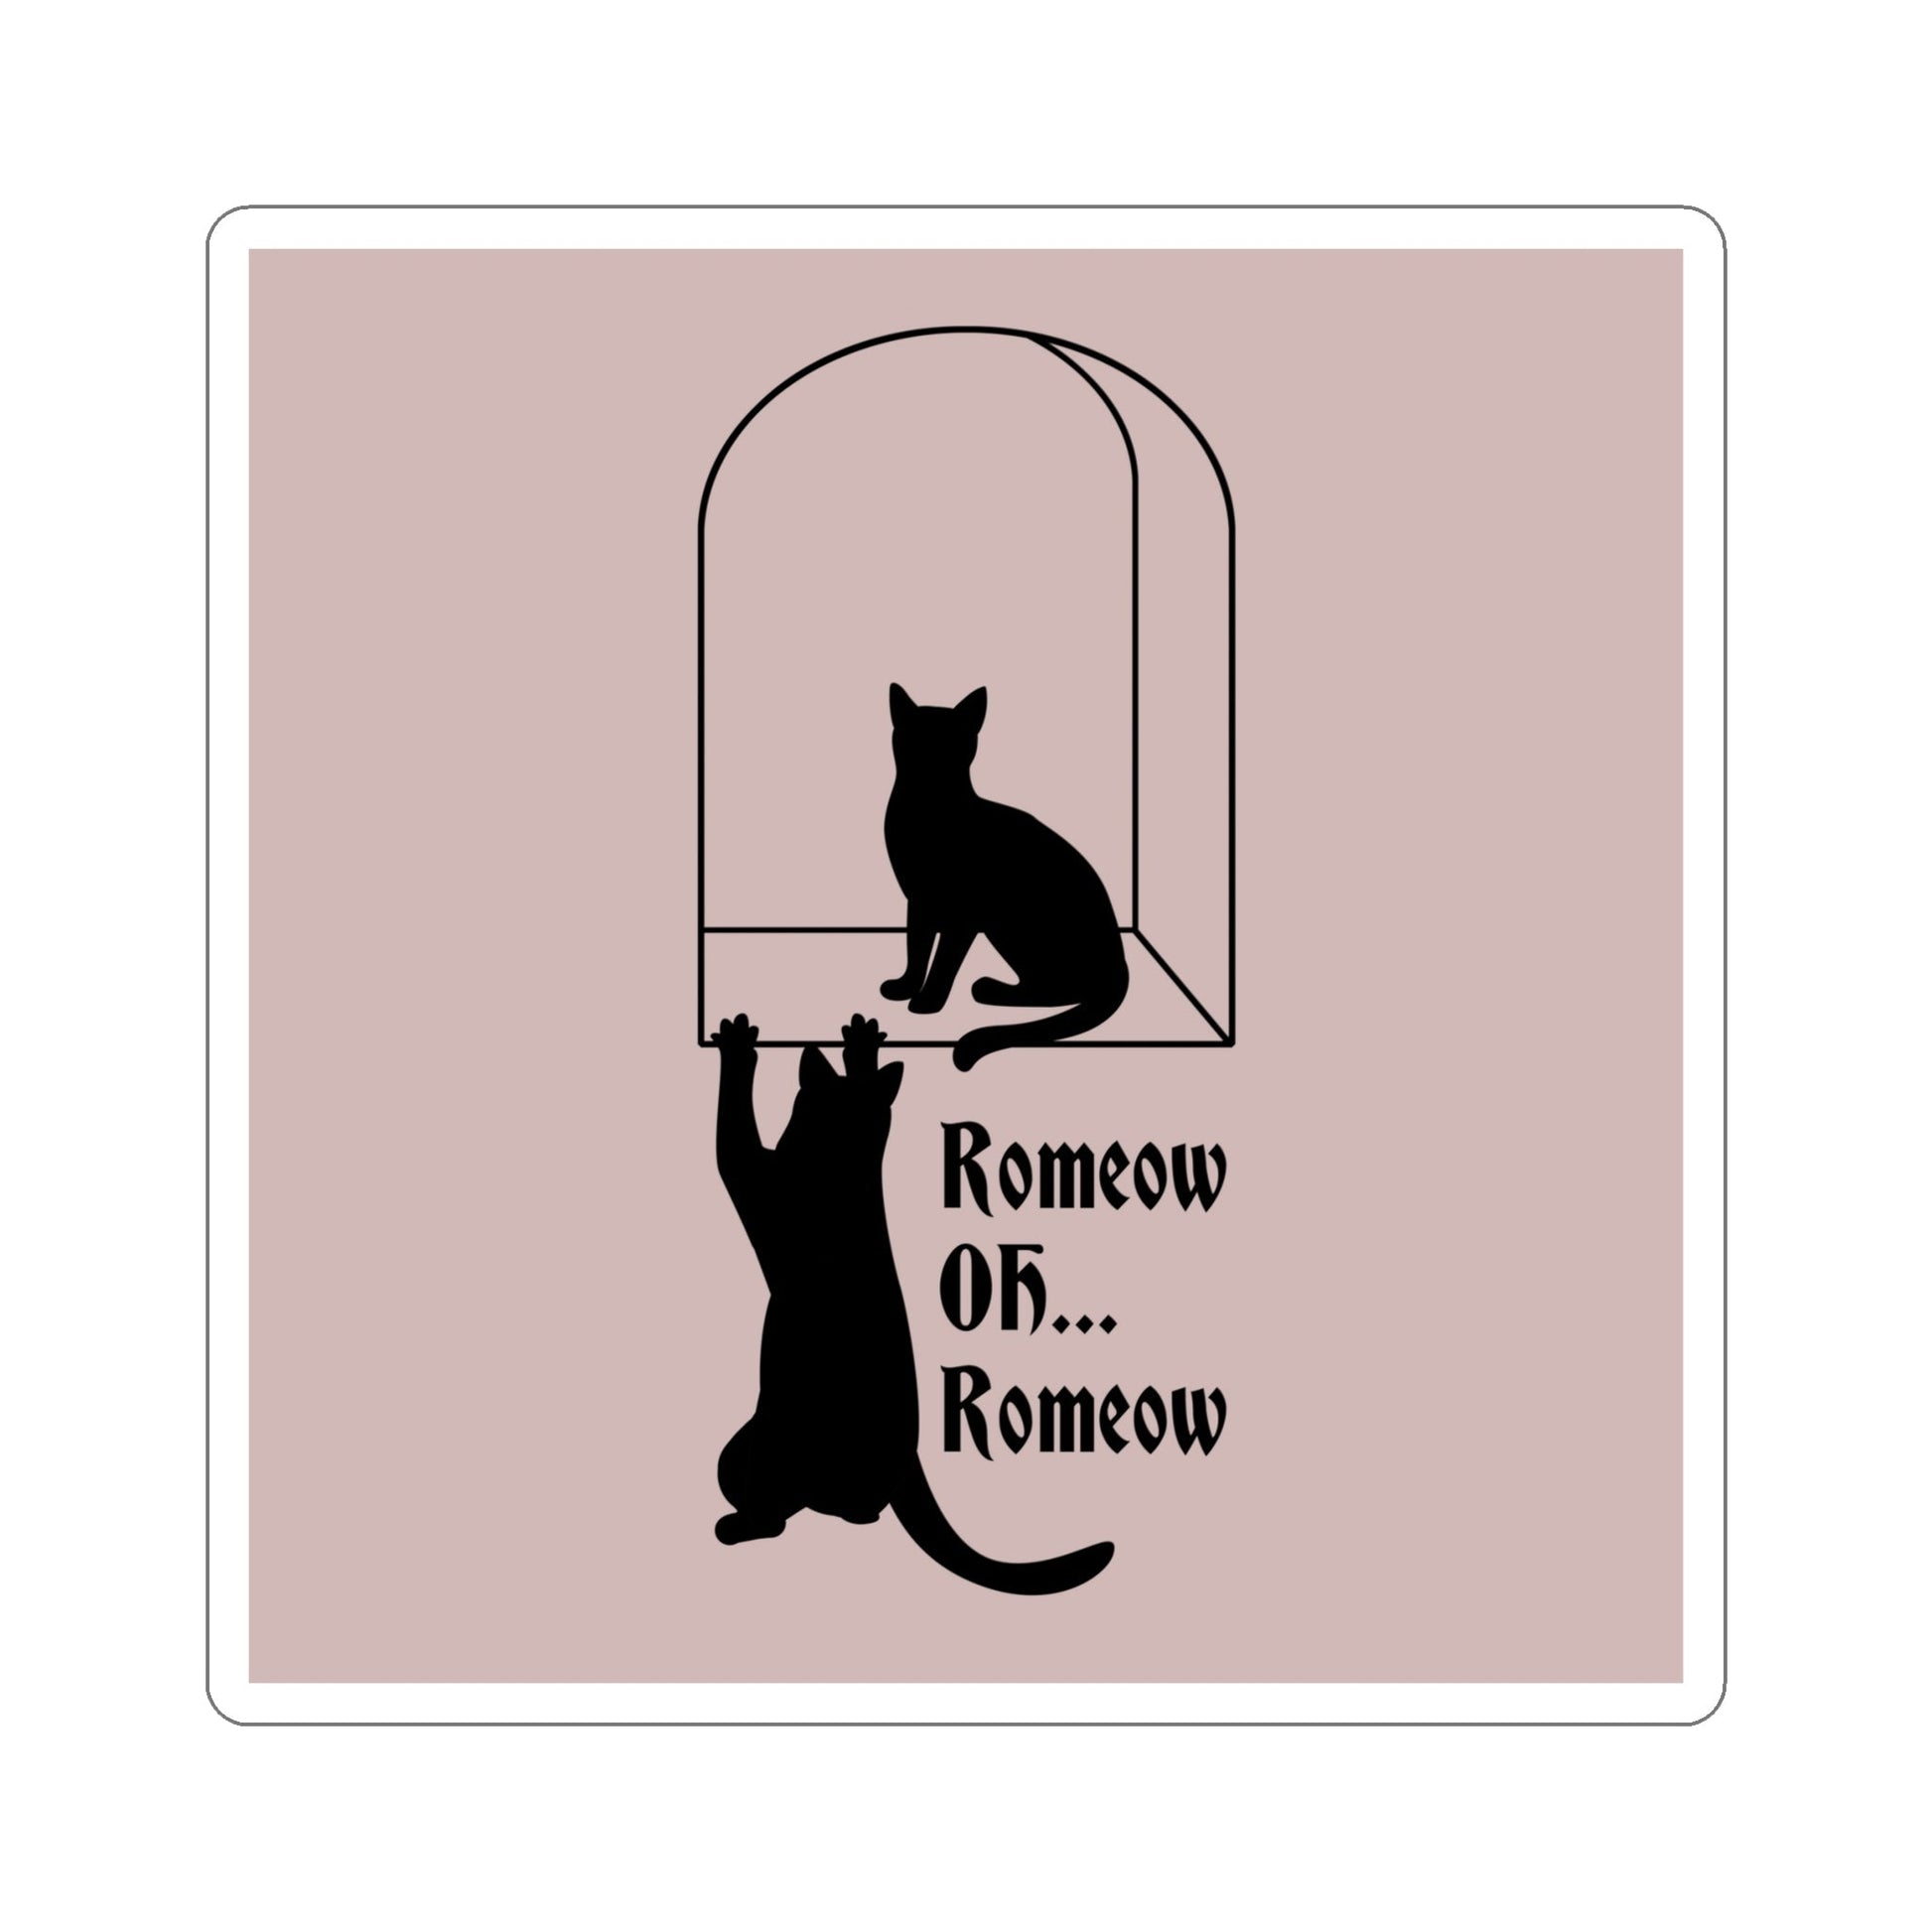 Romeow ang Mewliet Lovestory Valentine`s day Die-Cut Sticker Ichaku [Perfect Gifts Selection]